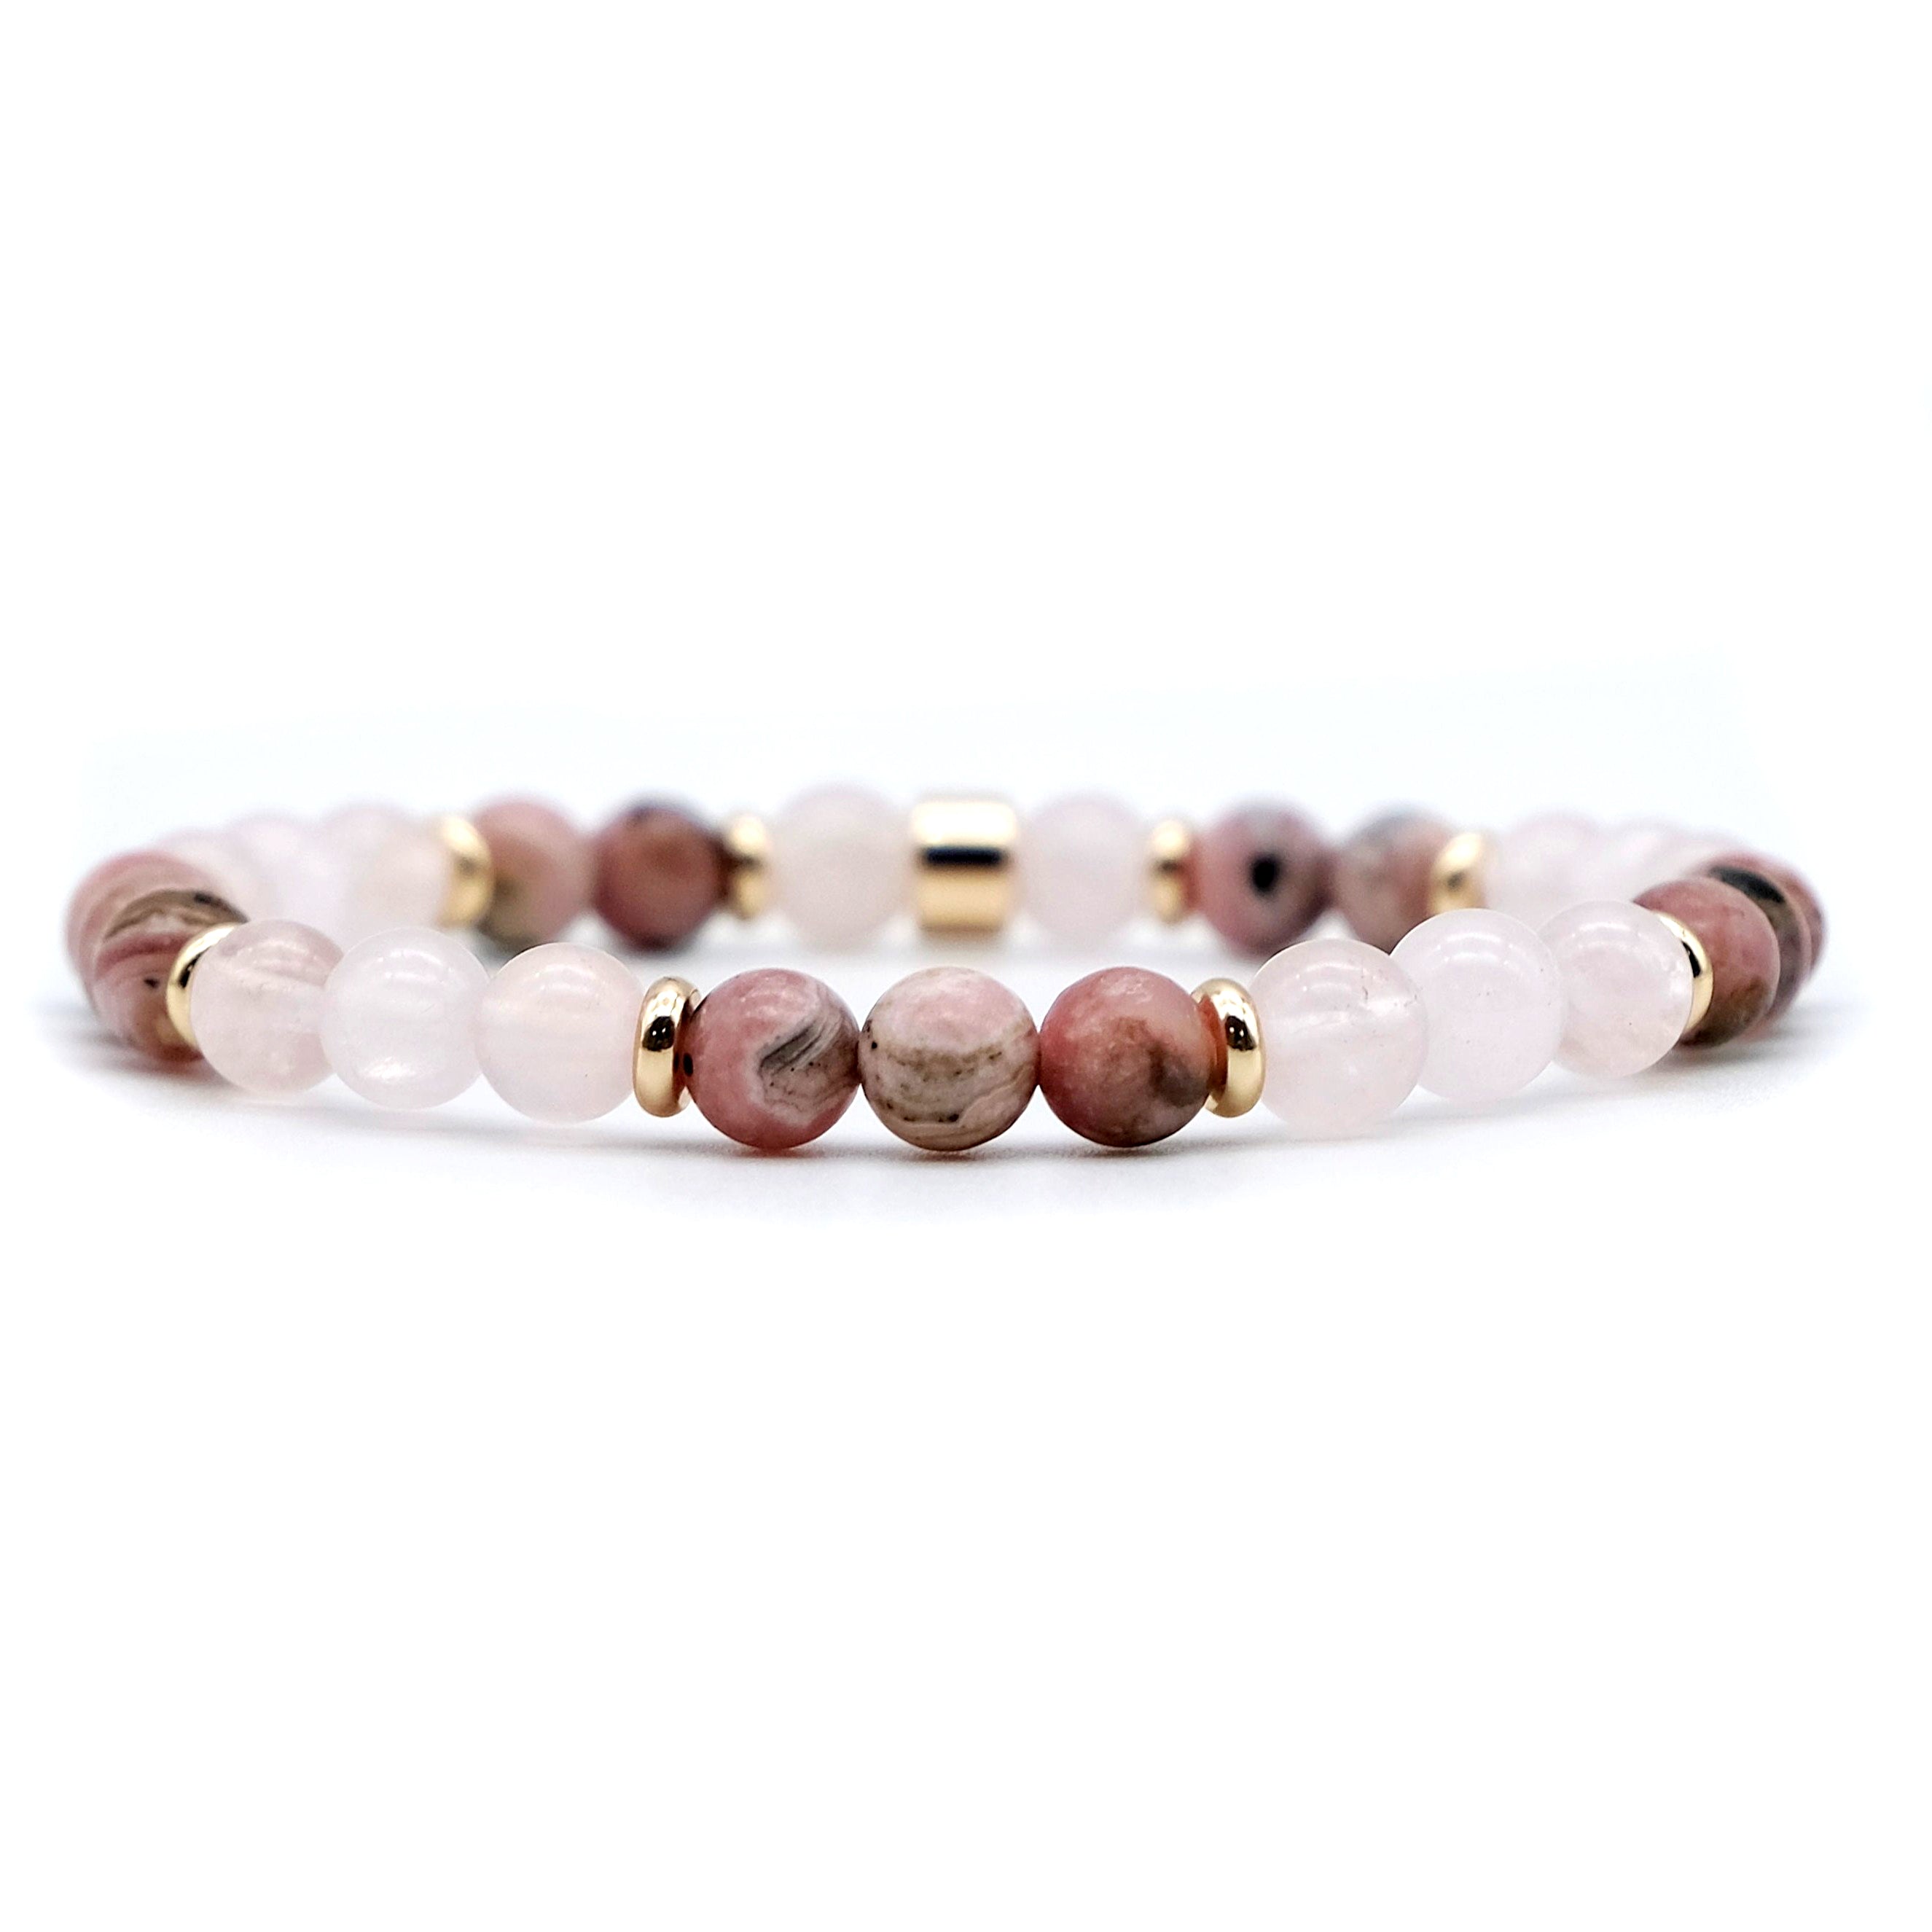 A Rhodochrosite and rose quartz gemstone bracelet in 6mm beads with gold accessories